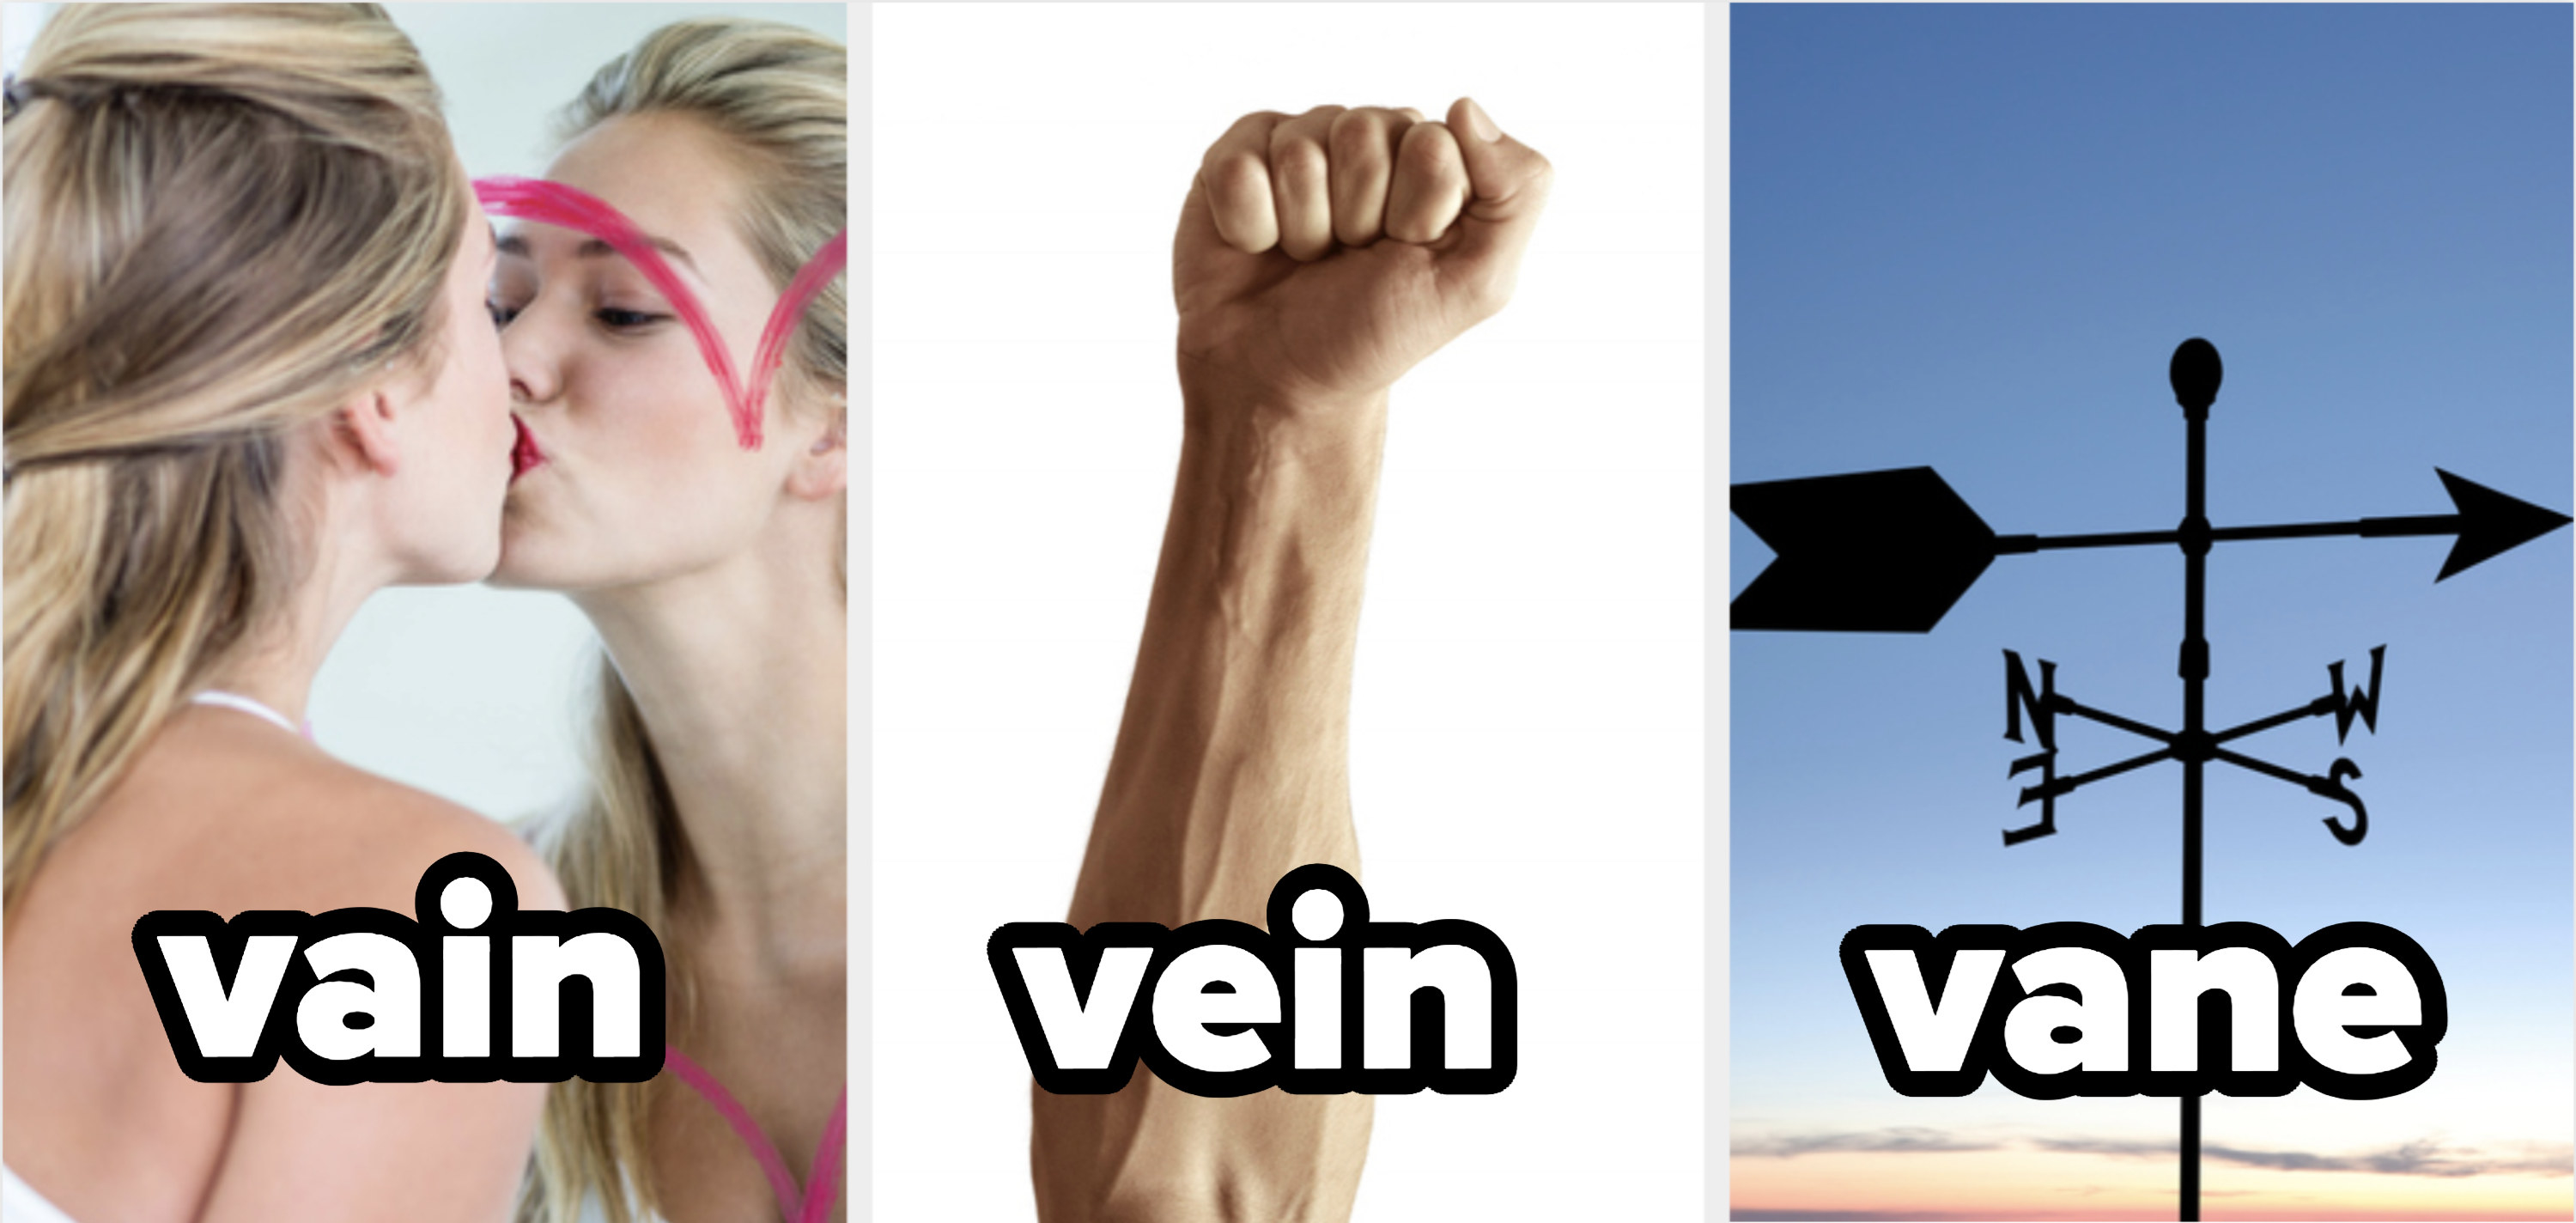 A vain woman, a vein in an arm, and a weathervane